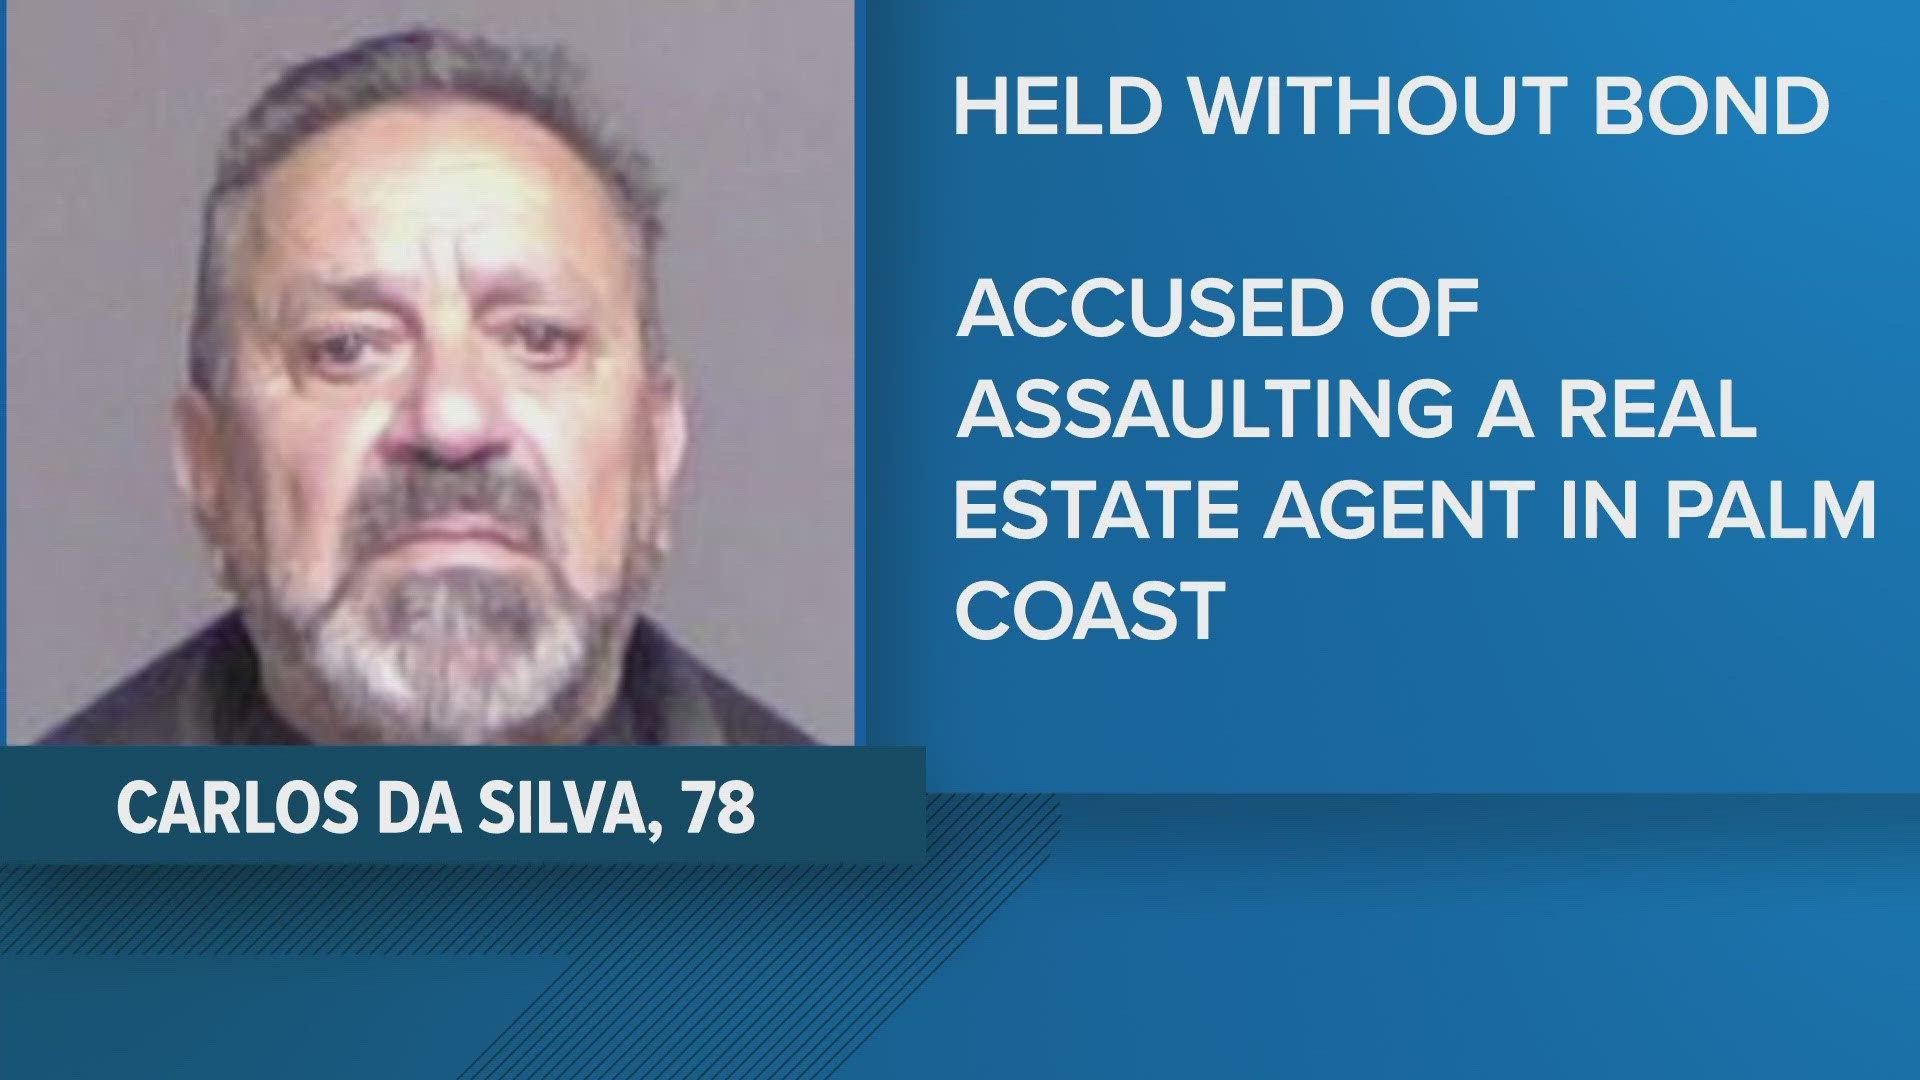 Carlos Da Silva was charged with burglary of a dwelling with assault and battery and misdemeanor simple battery.